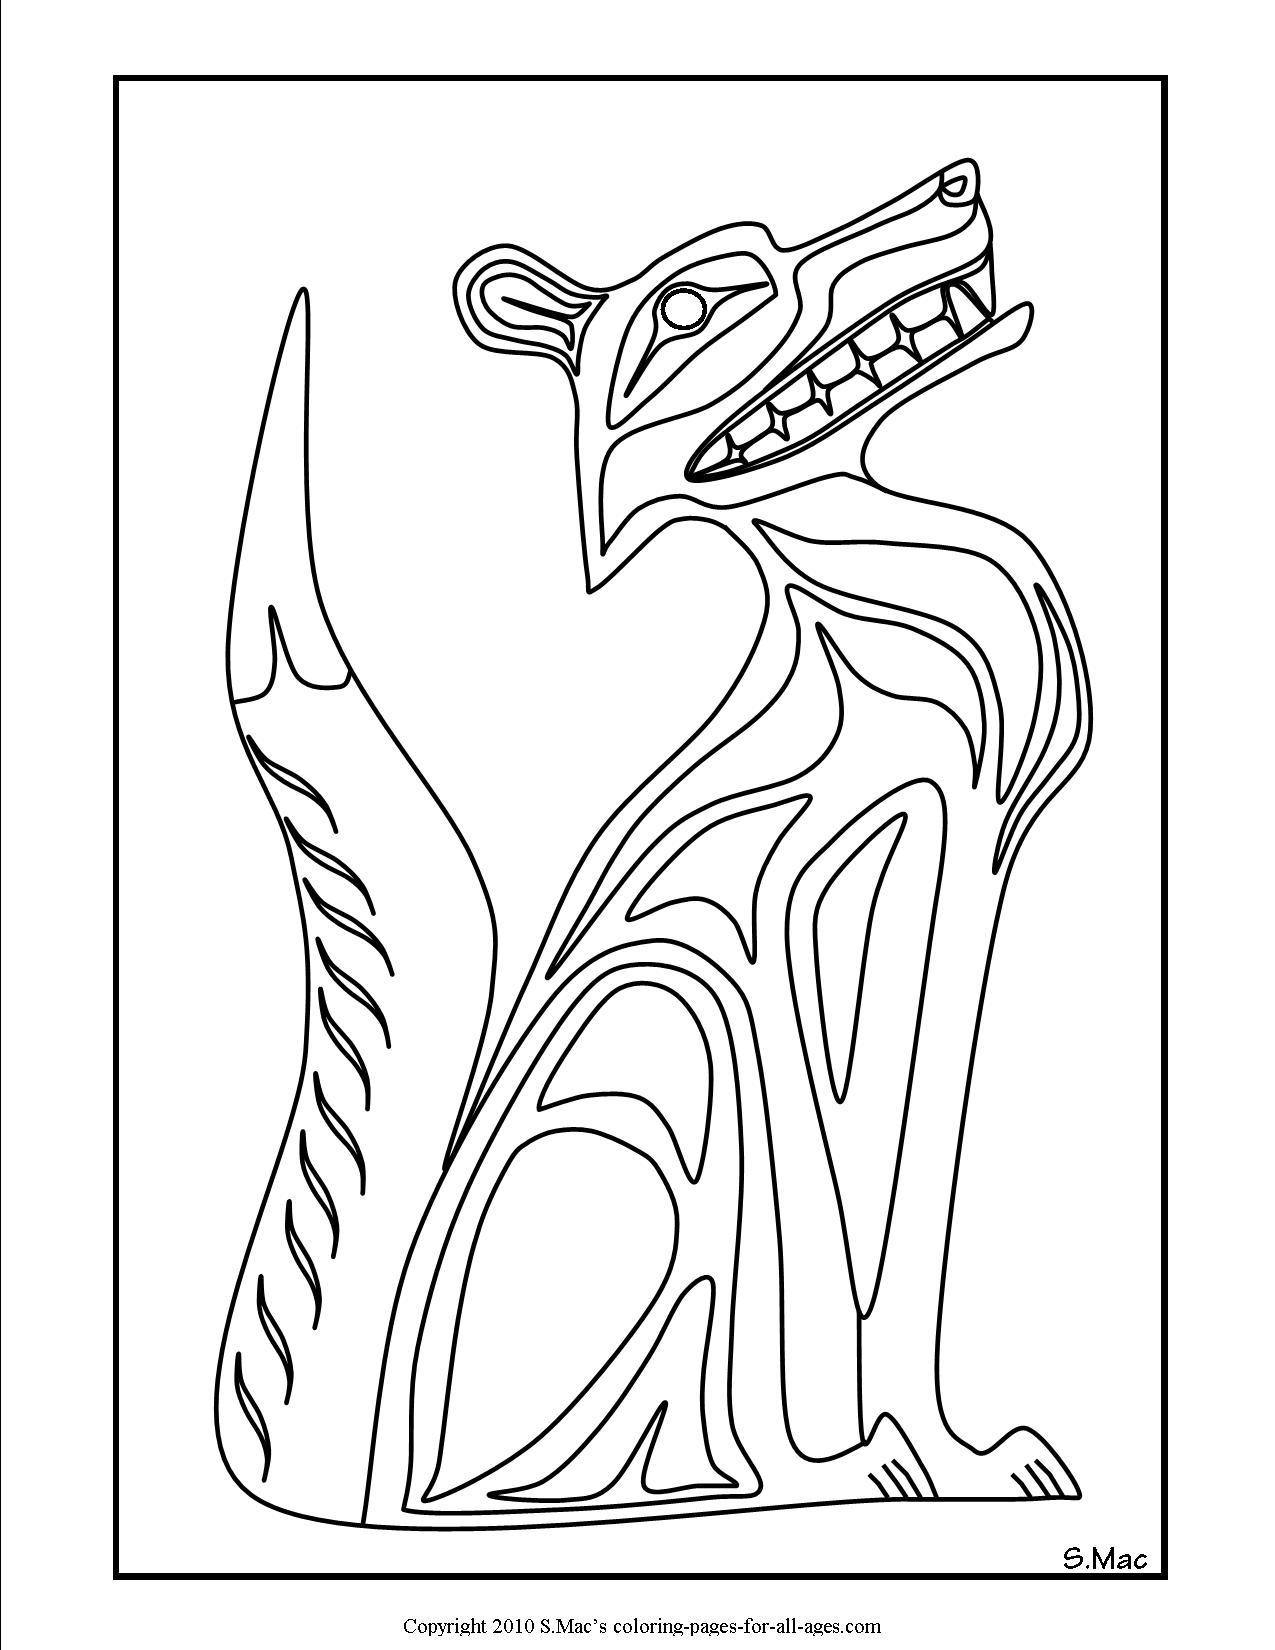 Pacific Northwest Native American Art Coloring Pages | S.Macs